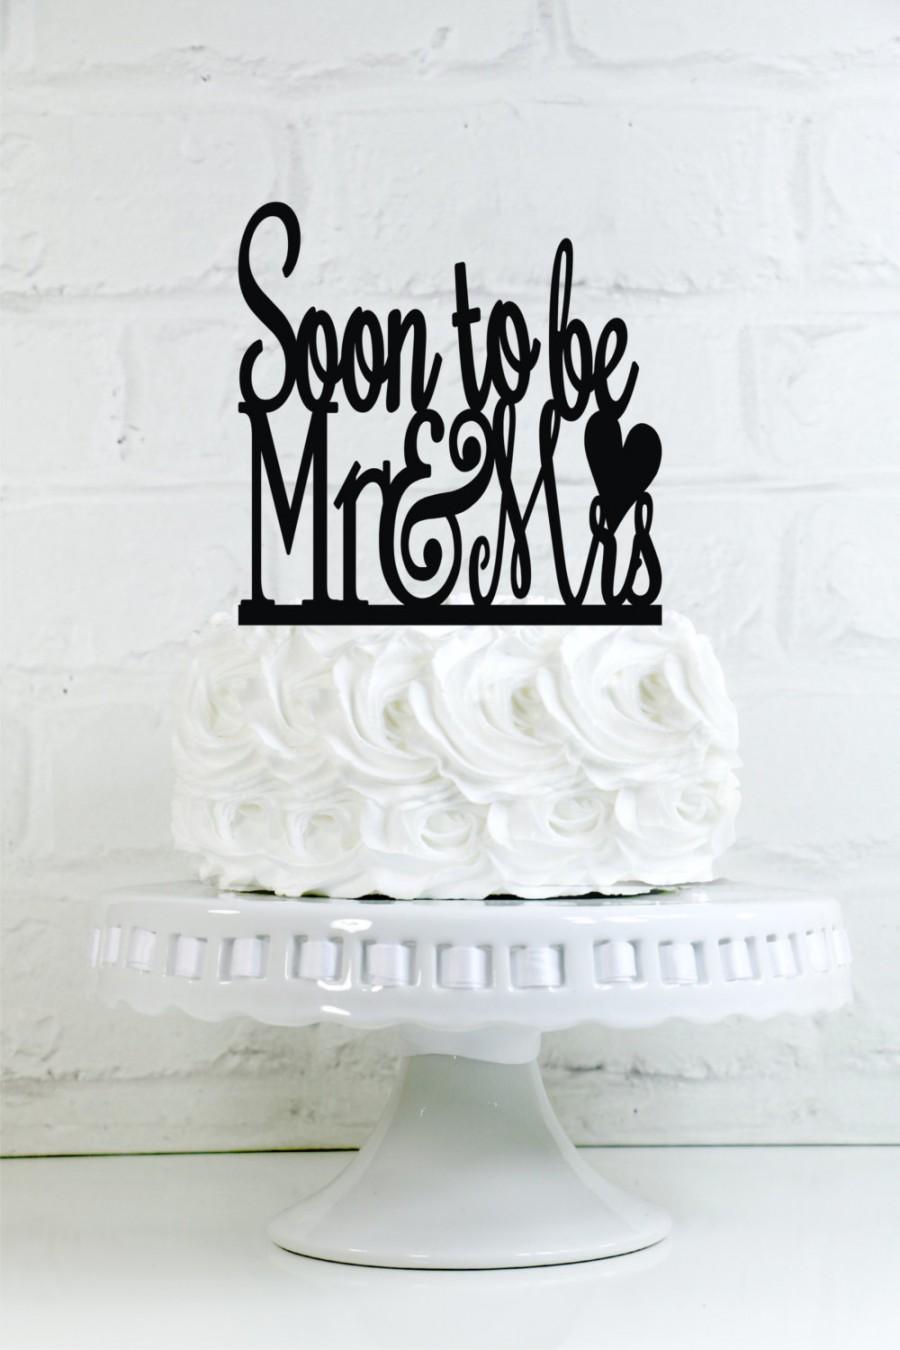 Mariage - Soon to be Mr and Mrs Engagement Party Cake Topper or Sign with a heart